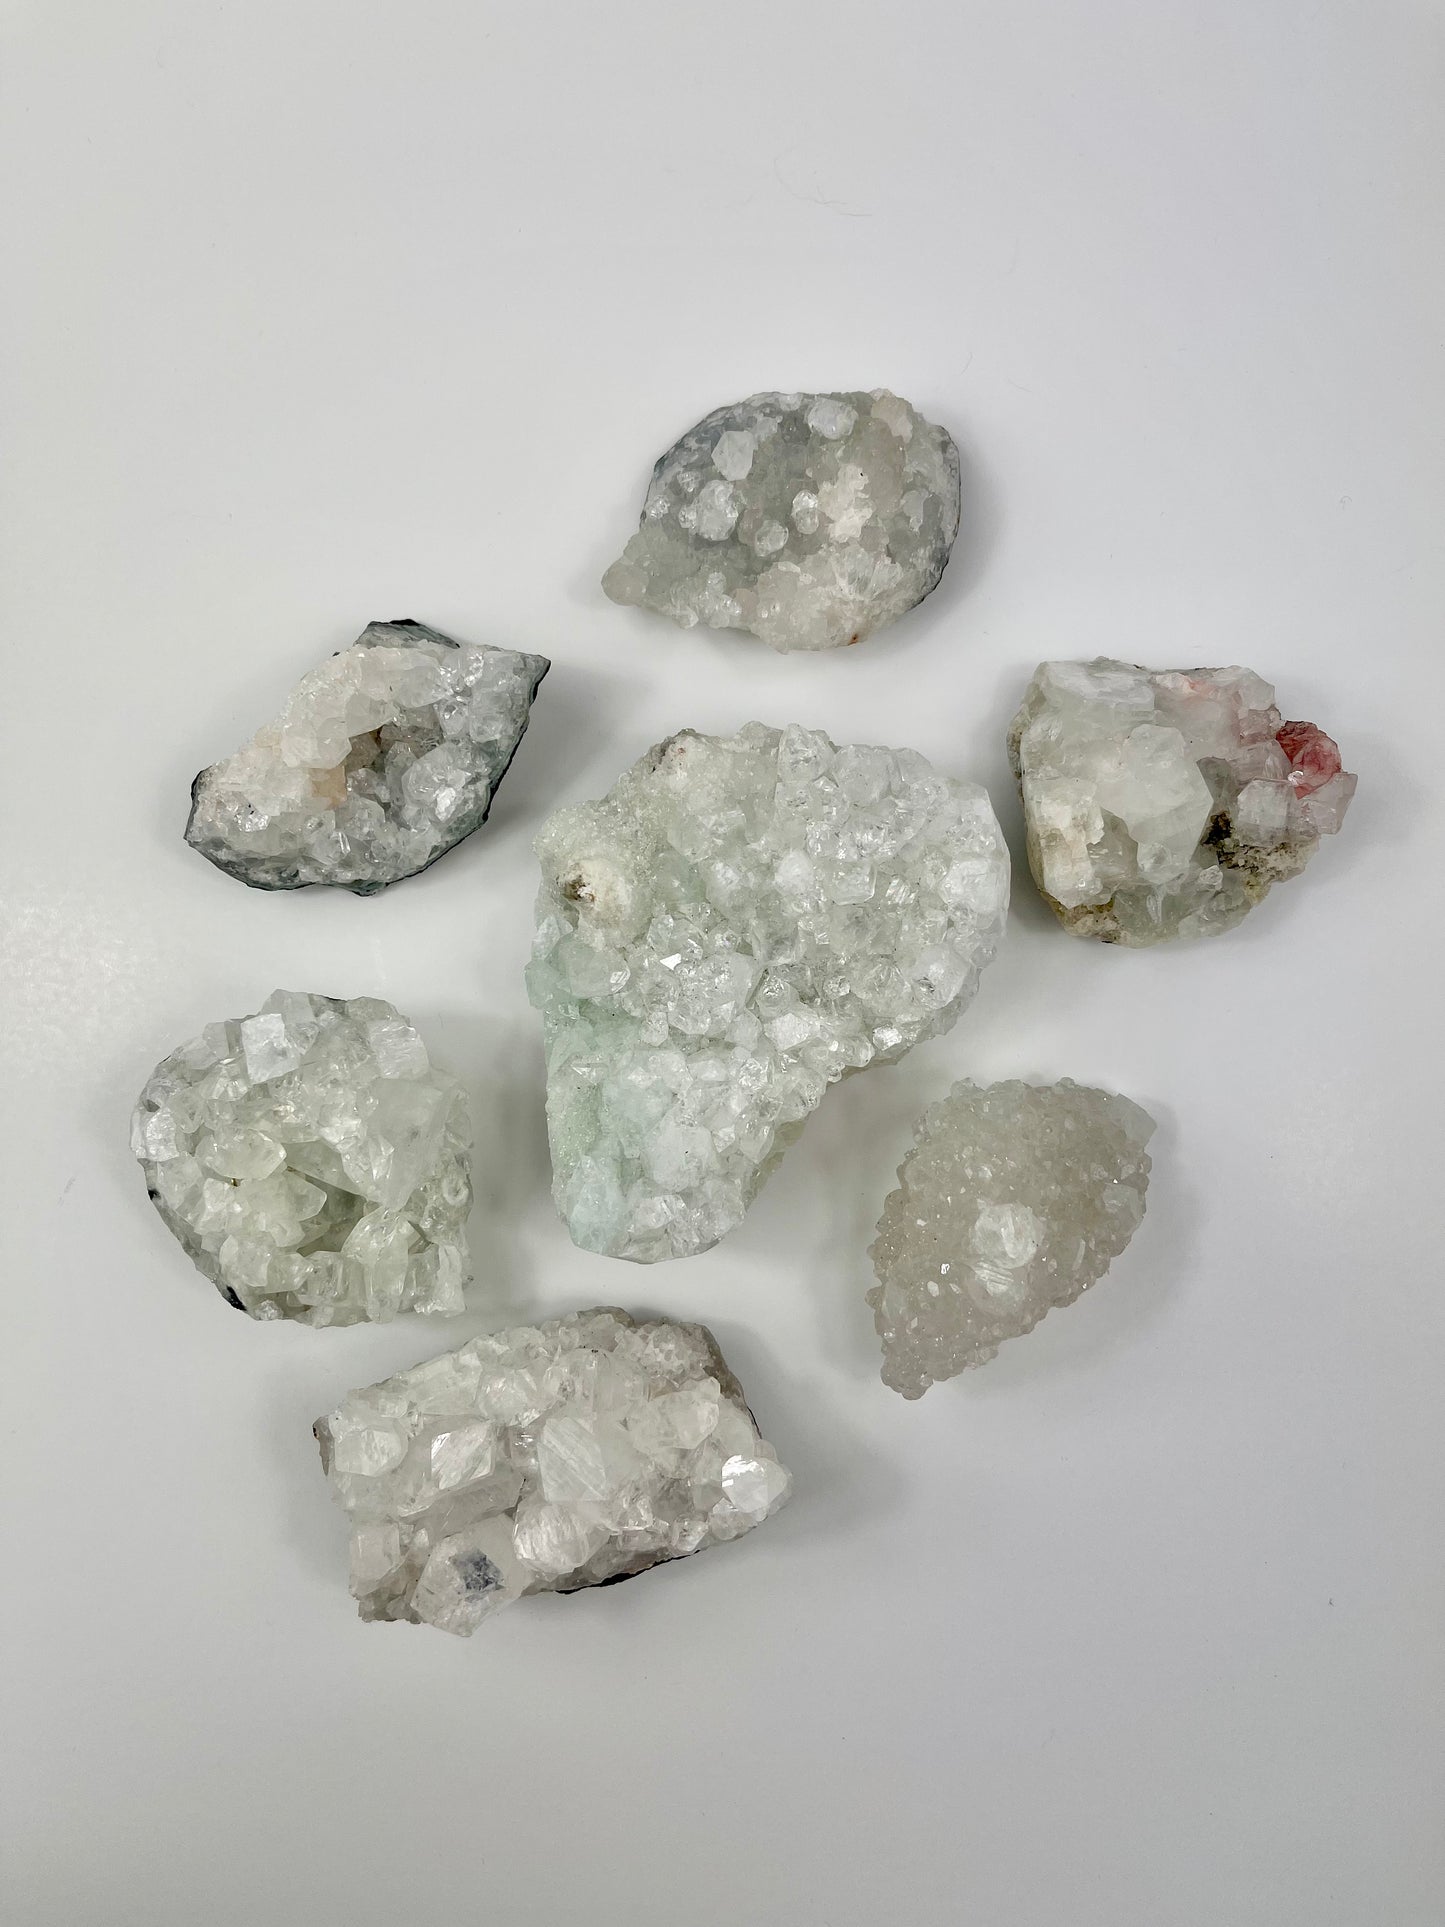 Apophyllite Clusters Group Picture